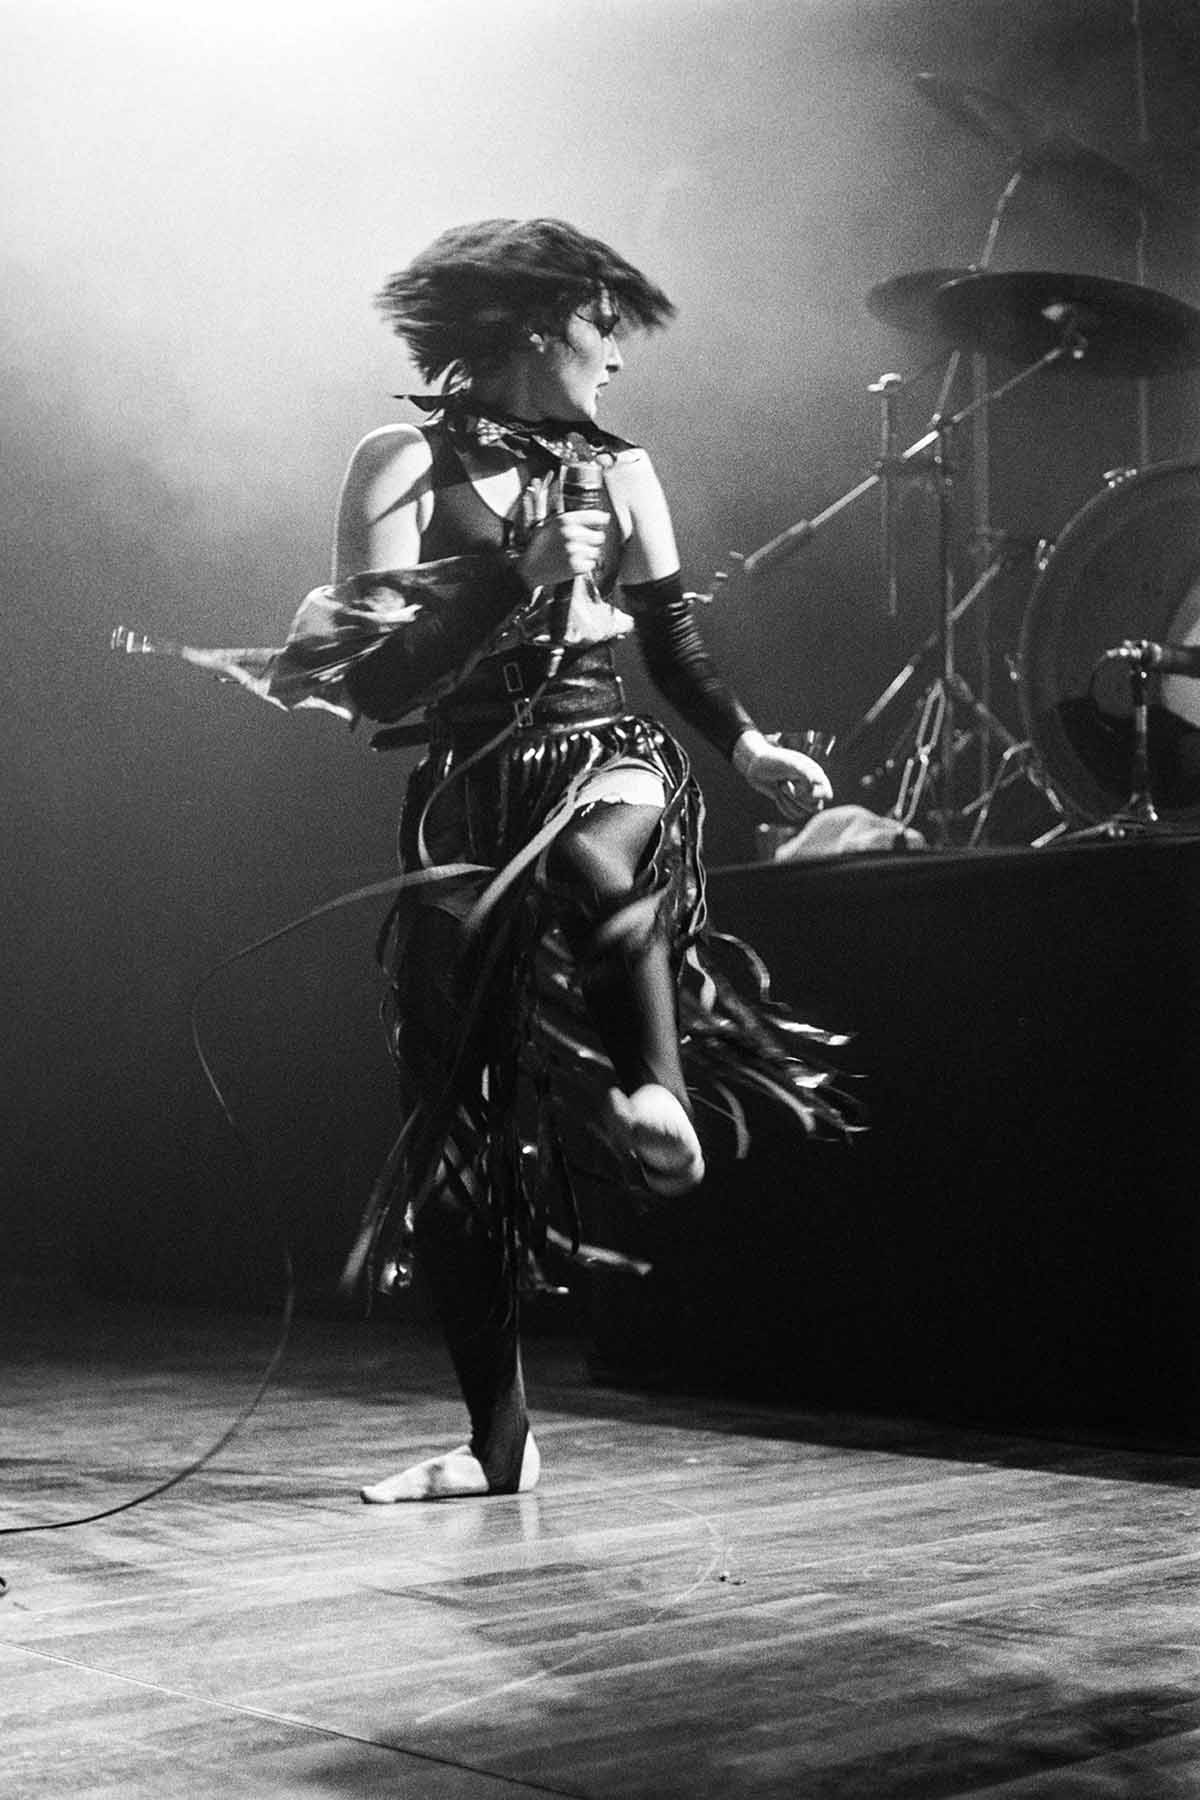 Live photos of experimental New Wave, Noise, Post-Punk, Industrial en Avantgarde bands inge-bekkers-photography-siouxsie-and-the-banshees-pandora-music-box-1983-live-alternative-bands-0357-fotografie